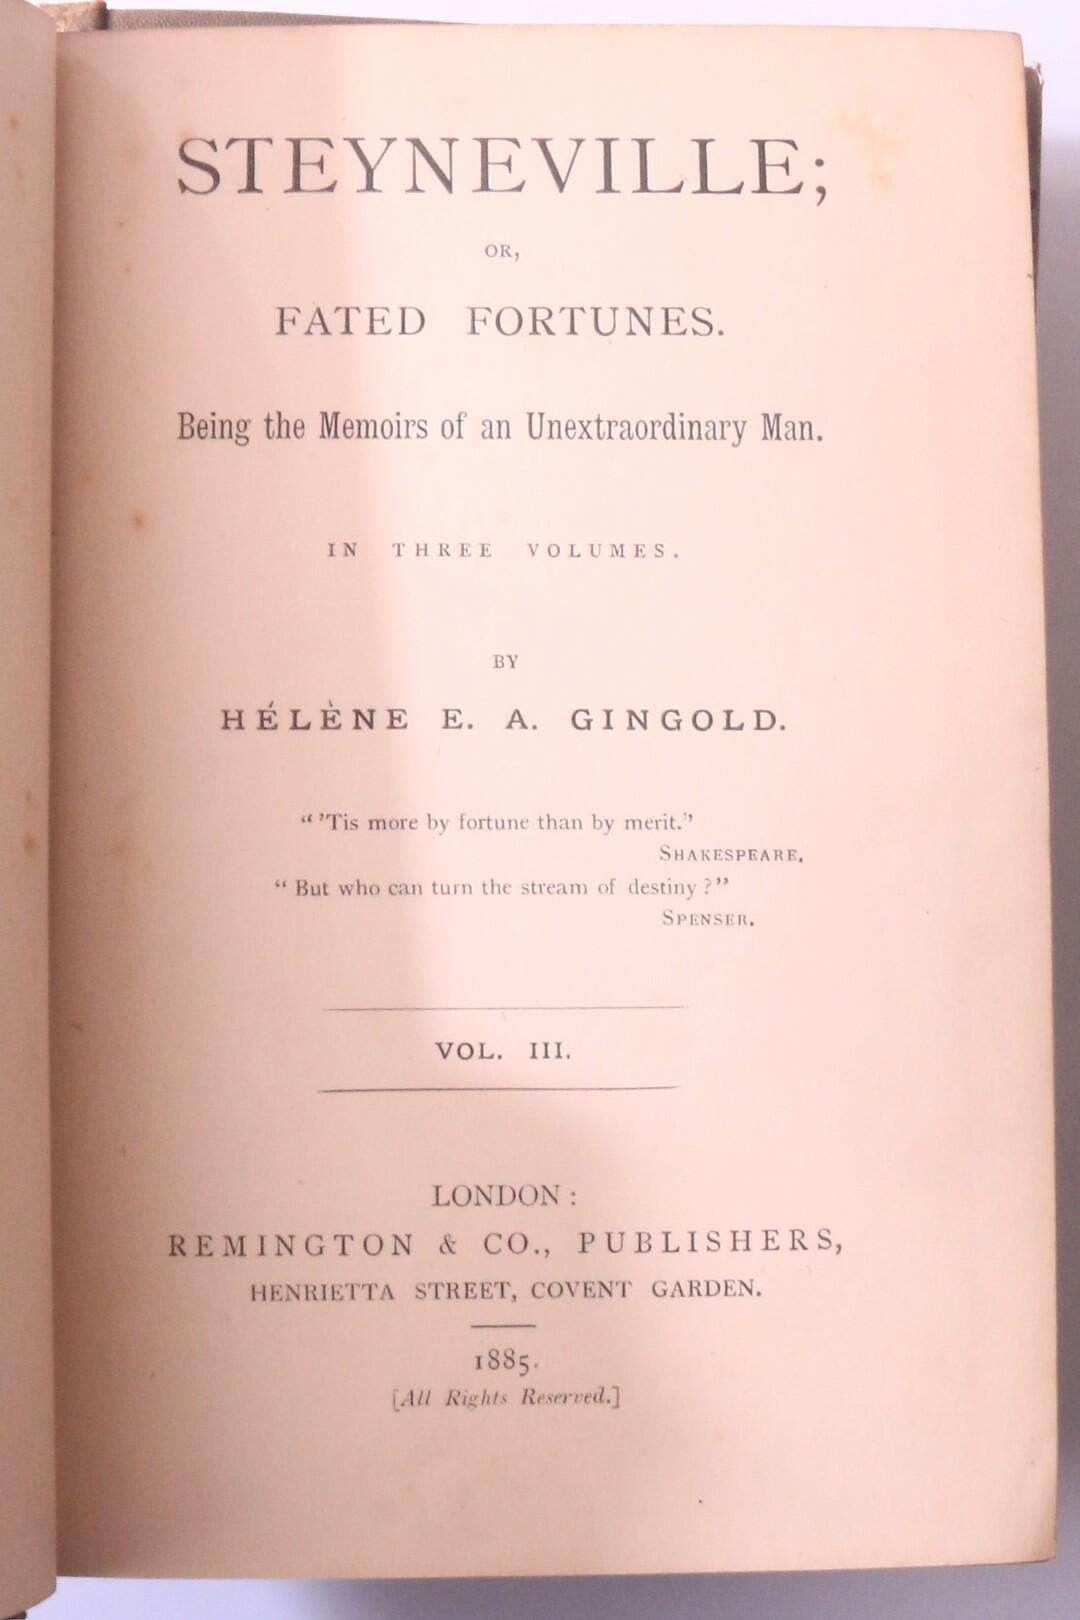 Helene E.A. Gingold - Steyneville; or, Fated Fortunes. Being the Memoirs of an Unextraordinary Man. - Remington & Co., 1885, First Edition.